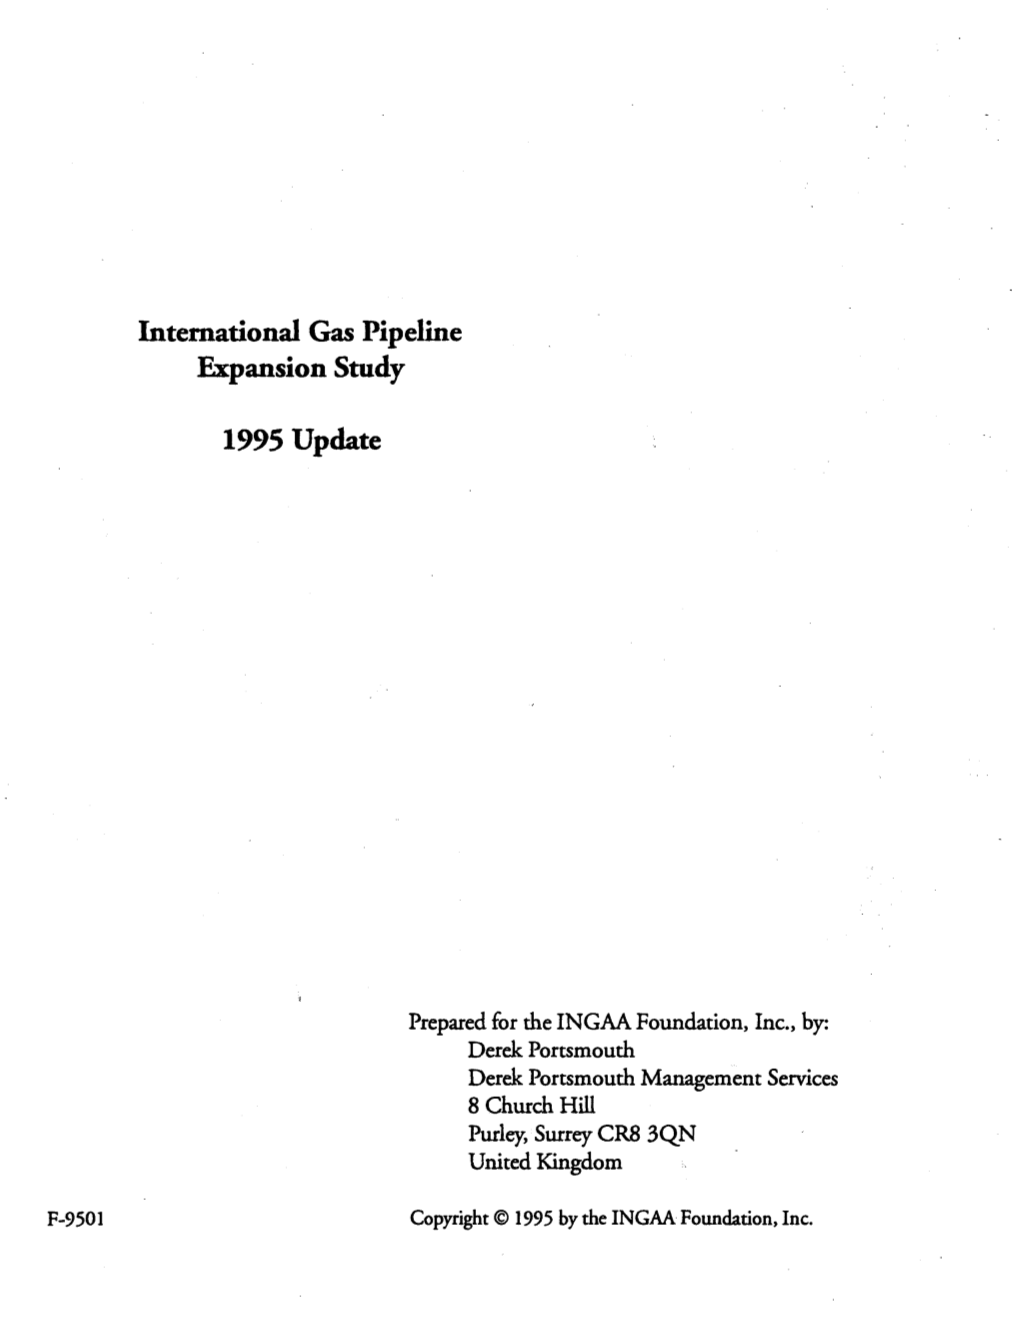 International Gas Pipeline Expansion Study 1995 Update